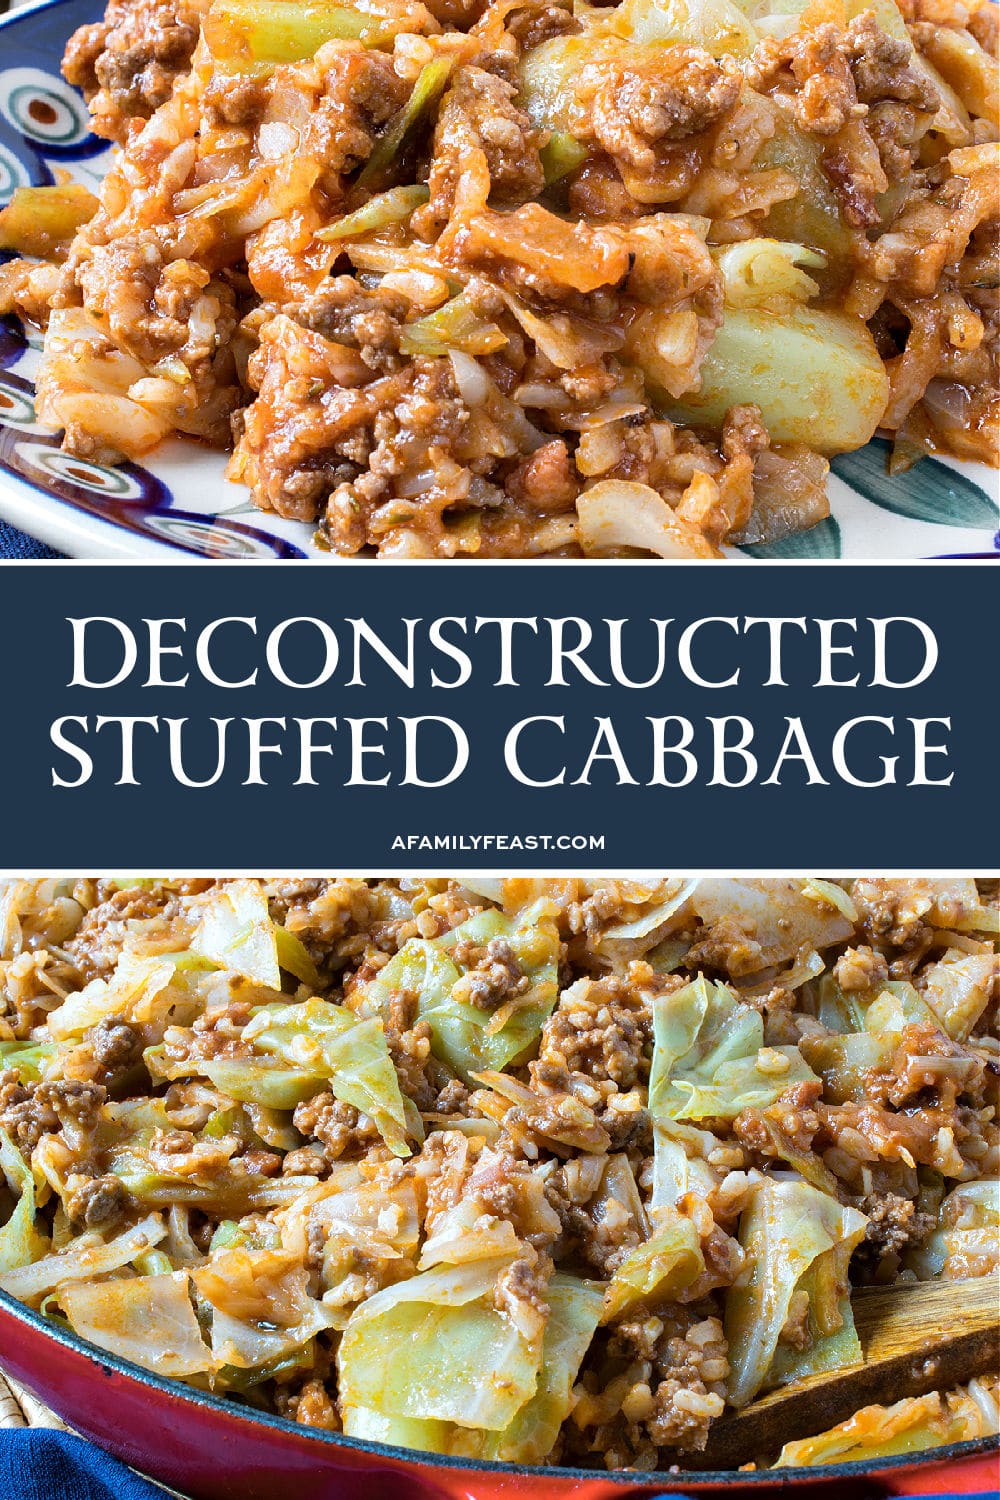 Deconstructed Stuffed Cabbage